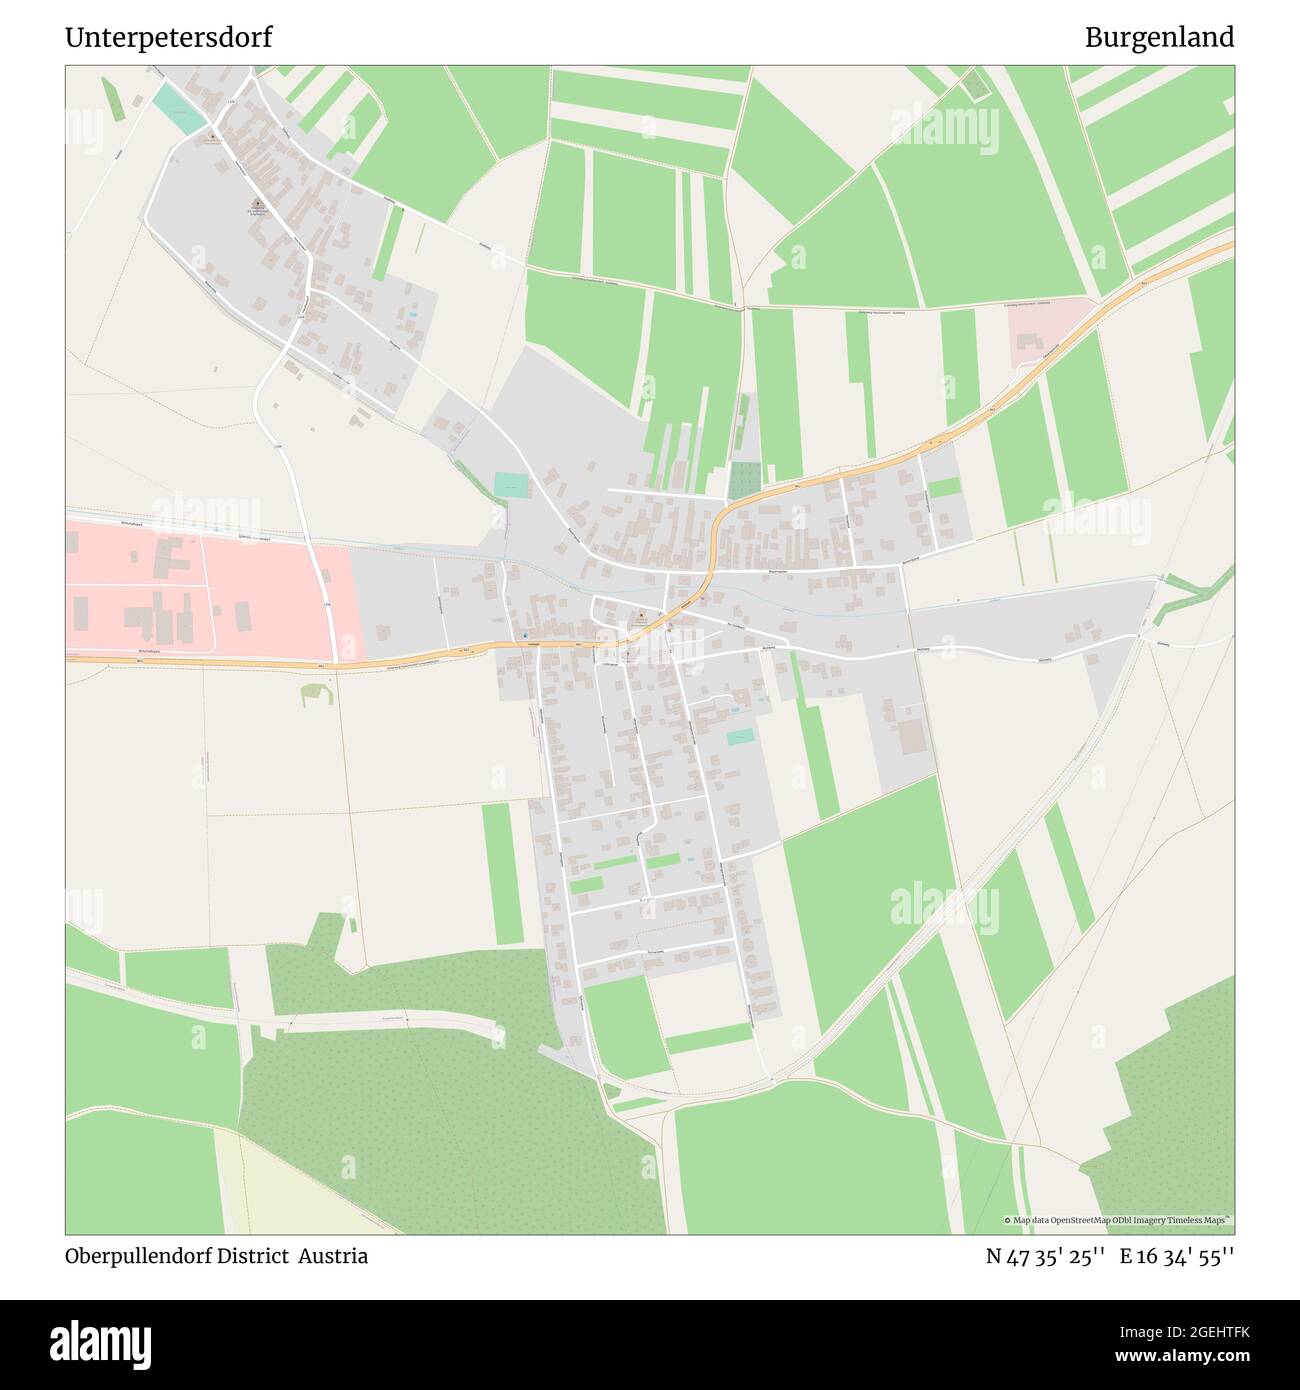 Unterpetersdorf, Oberpullendorf District, Austria, Burgenland, N 47 35' 25'', E 16 34' 55'', map, Timeless Map published in 2021. Travelers, explorers and adventurers like Florence Nightingale, David Livingstone, Ernest Shackleton, Lewis and Clark and Sherlock Holmes relied on maps to plan travels to the world's most remote corners, Timeless Maps is mapping most locations on the globe, showing the achievement of great dreams Stock Photo